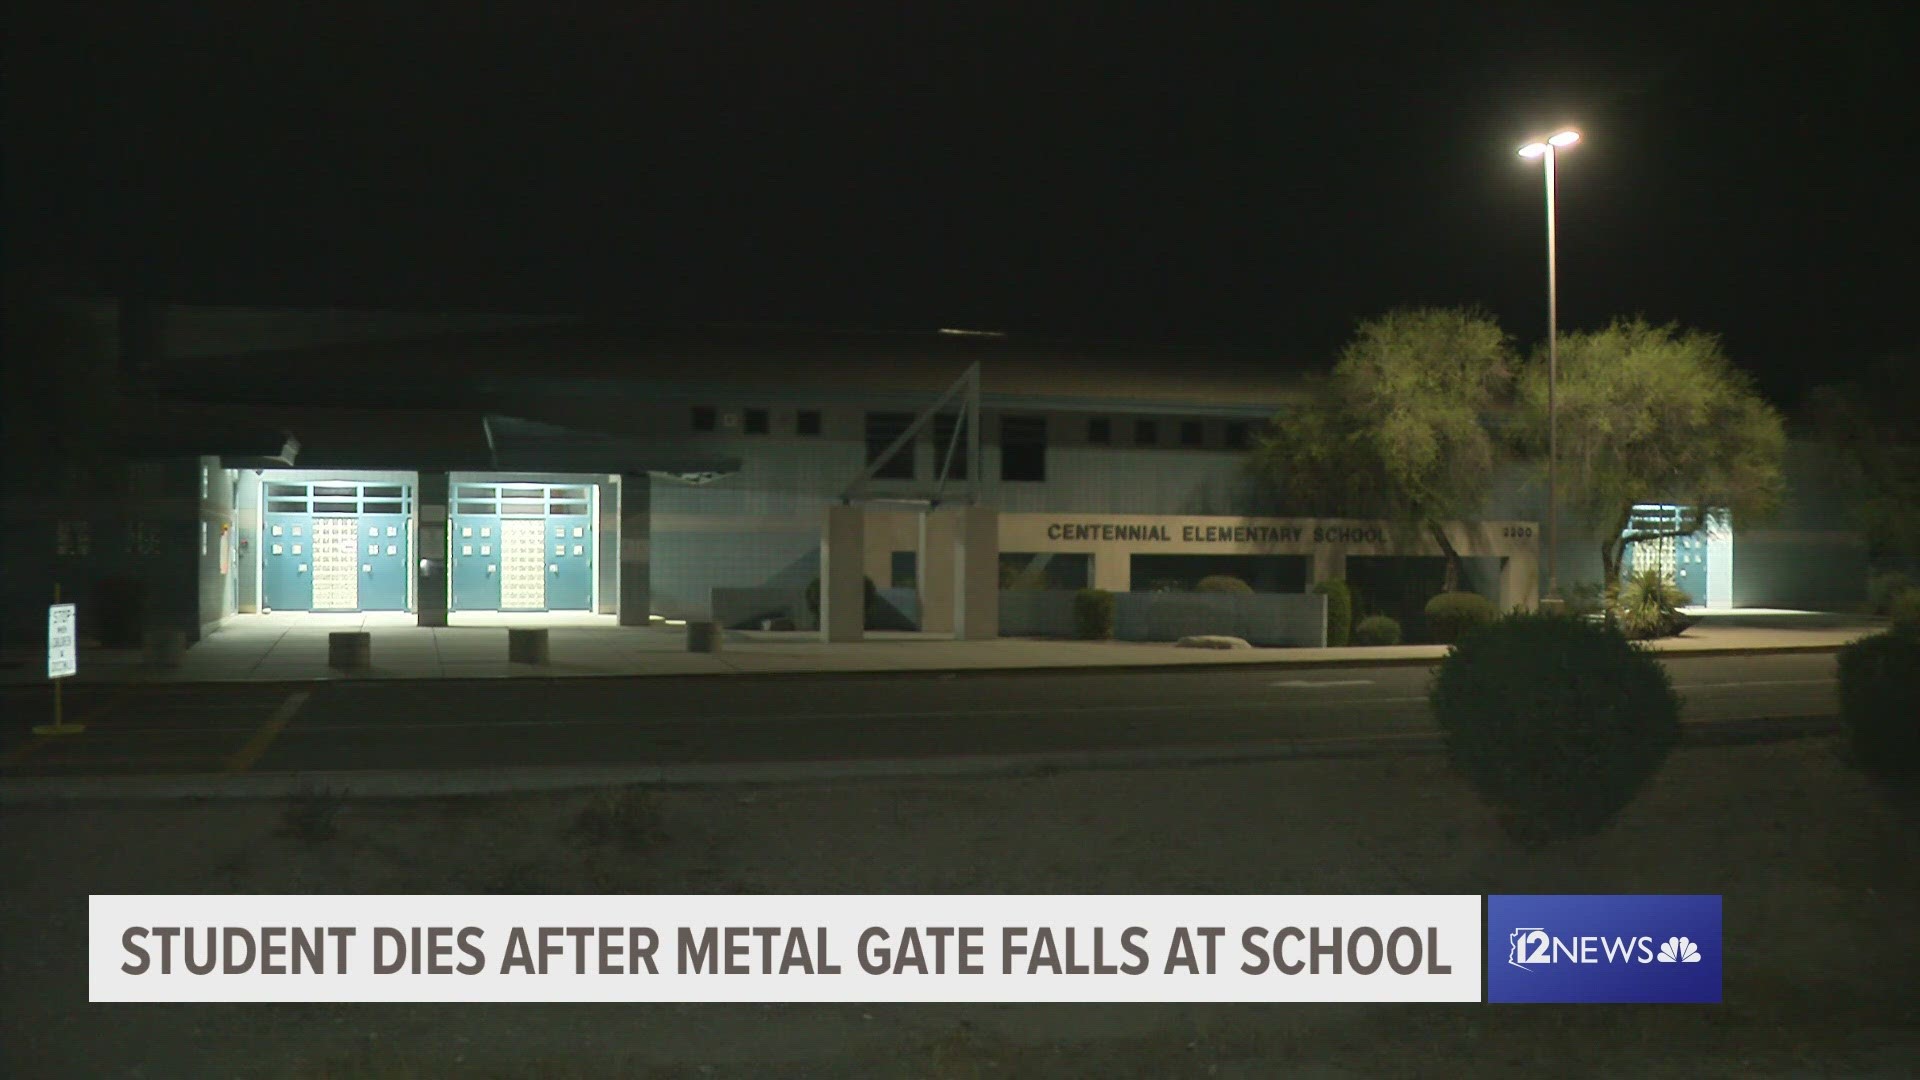 Pima County Sheriff's Department say the child was helping close the gate when it apparently disconnected from it's support and fell.